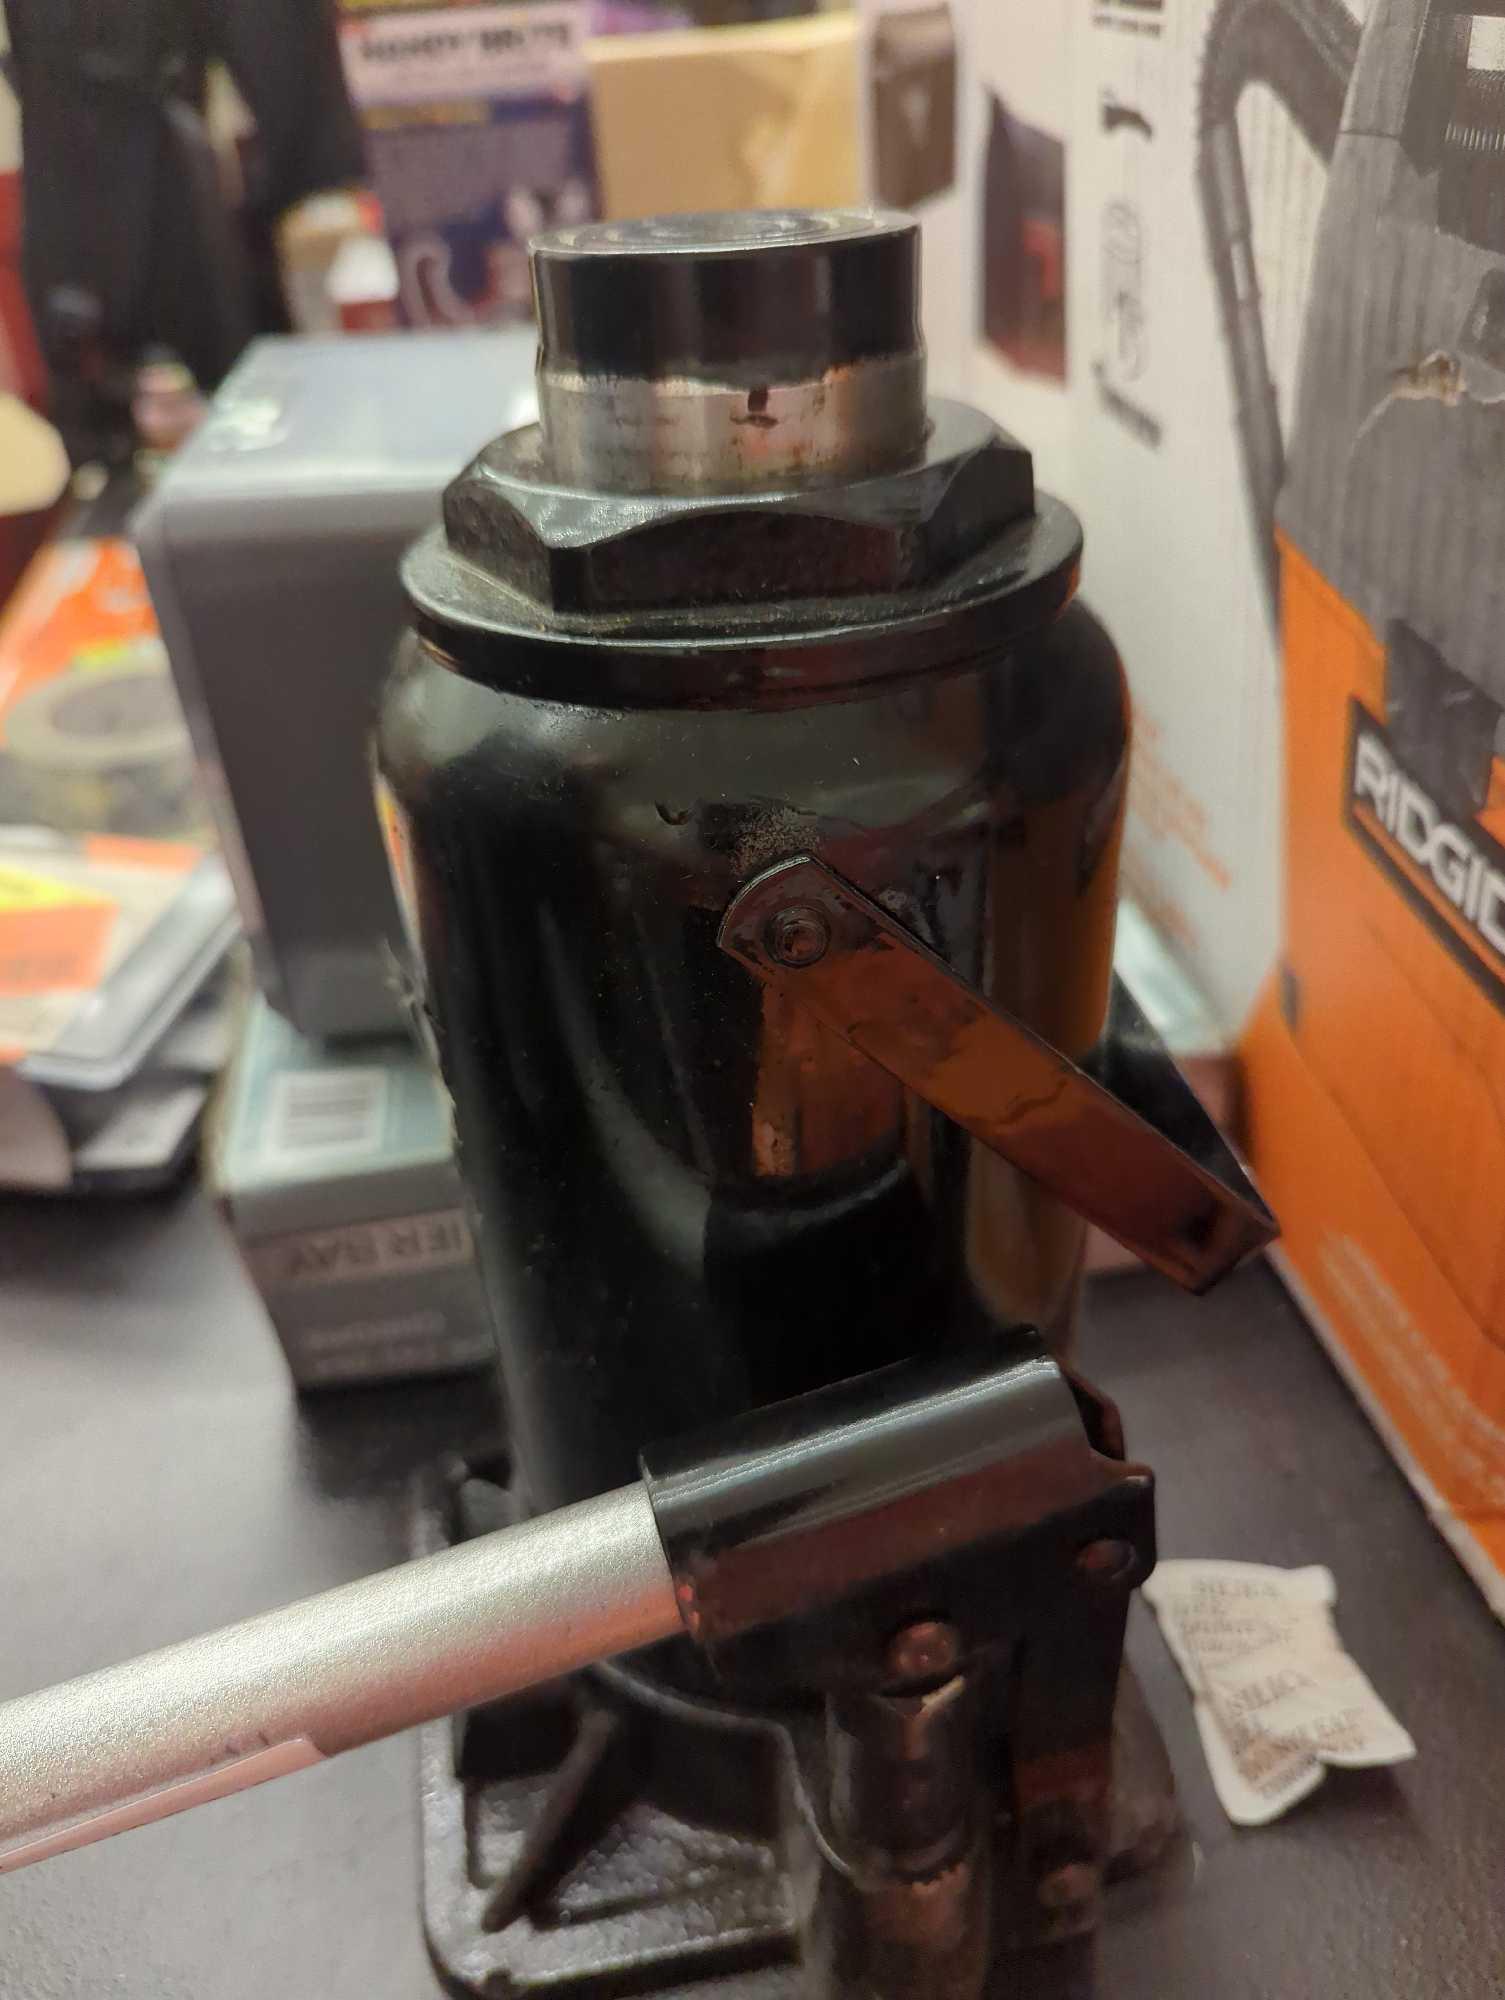 Husky (Damaged) 30-Ton Bottle Car Jack, Retail Price $90, Appears to be Used, Missing Hydrologic